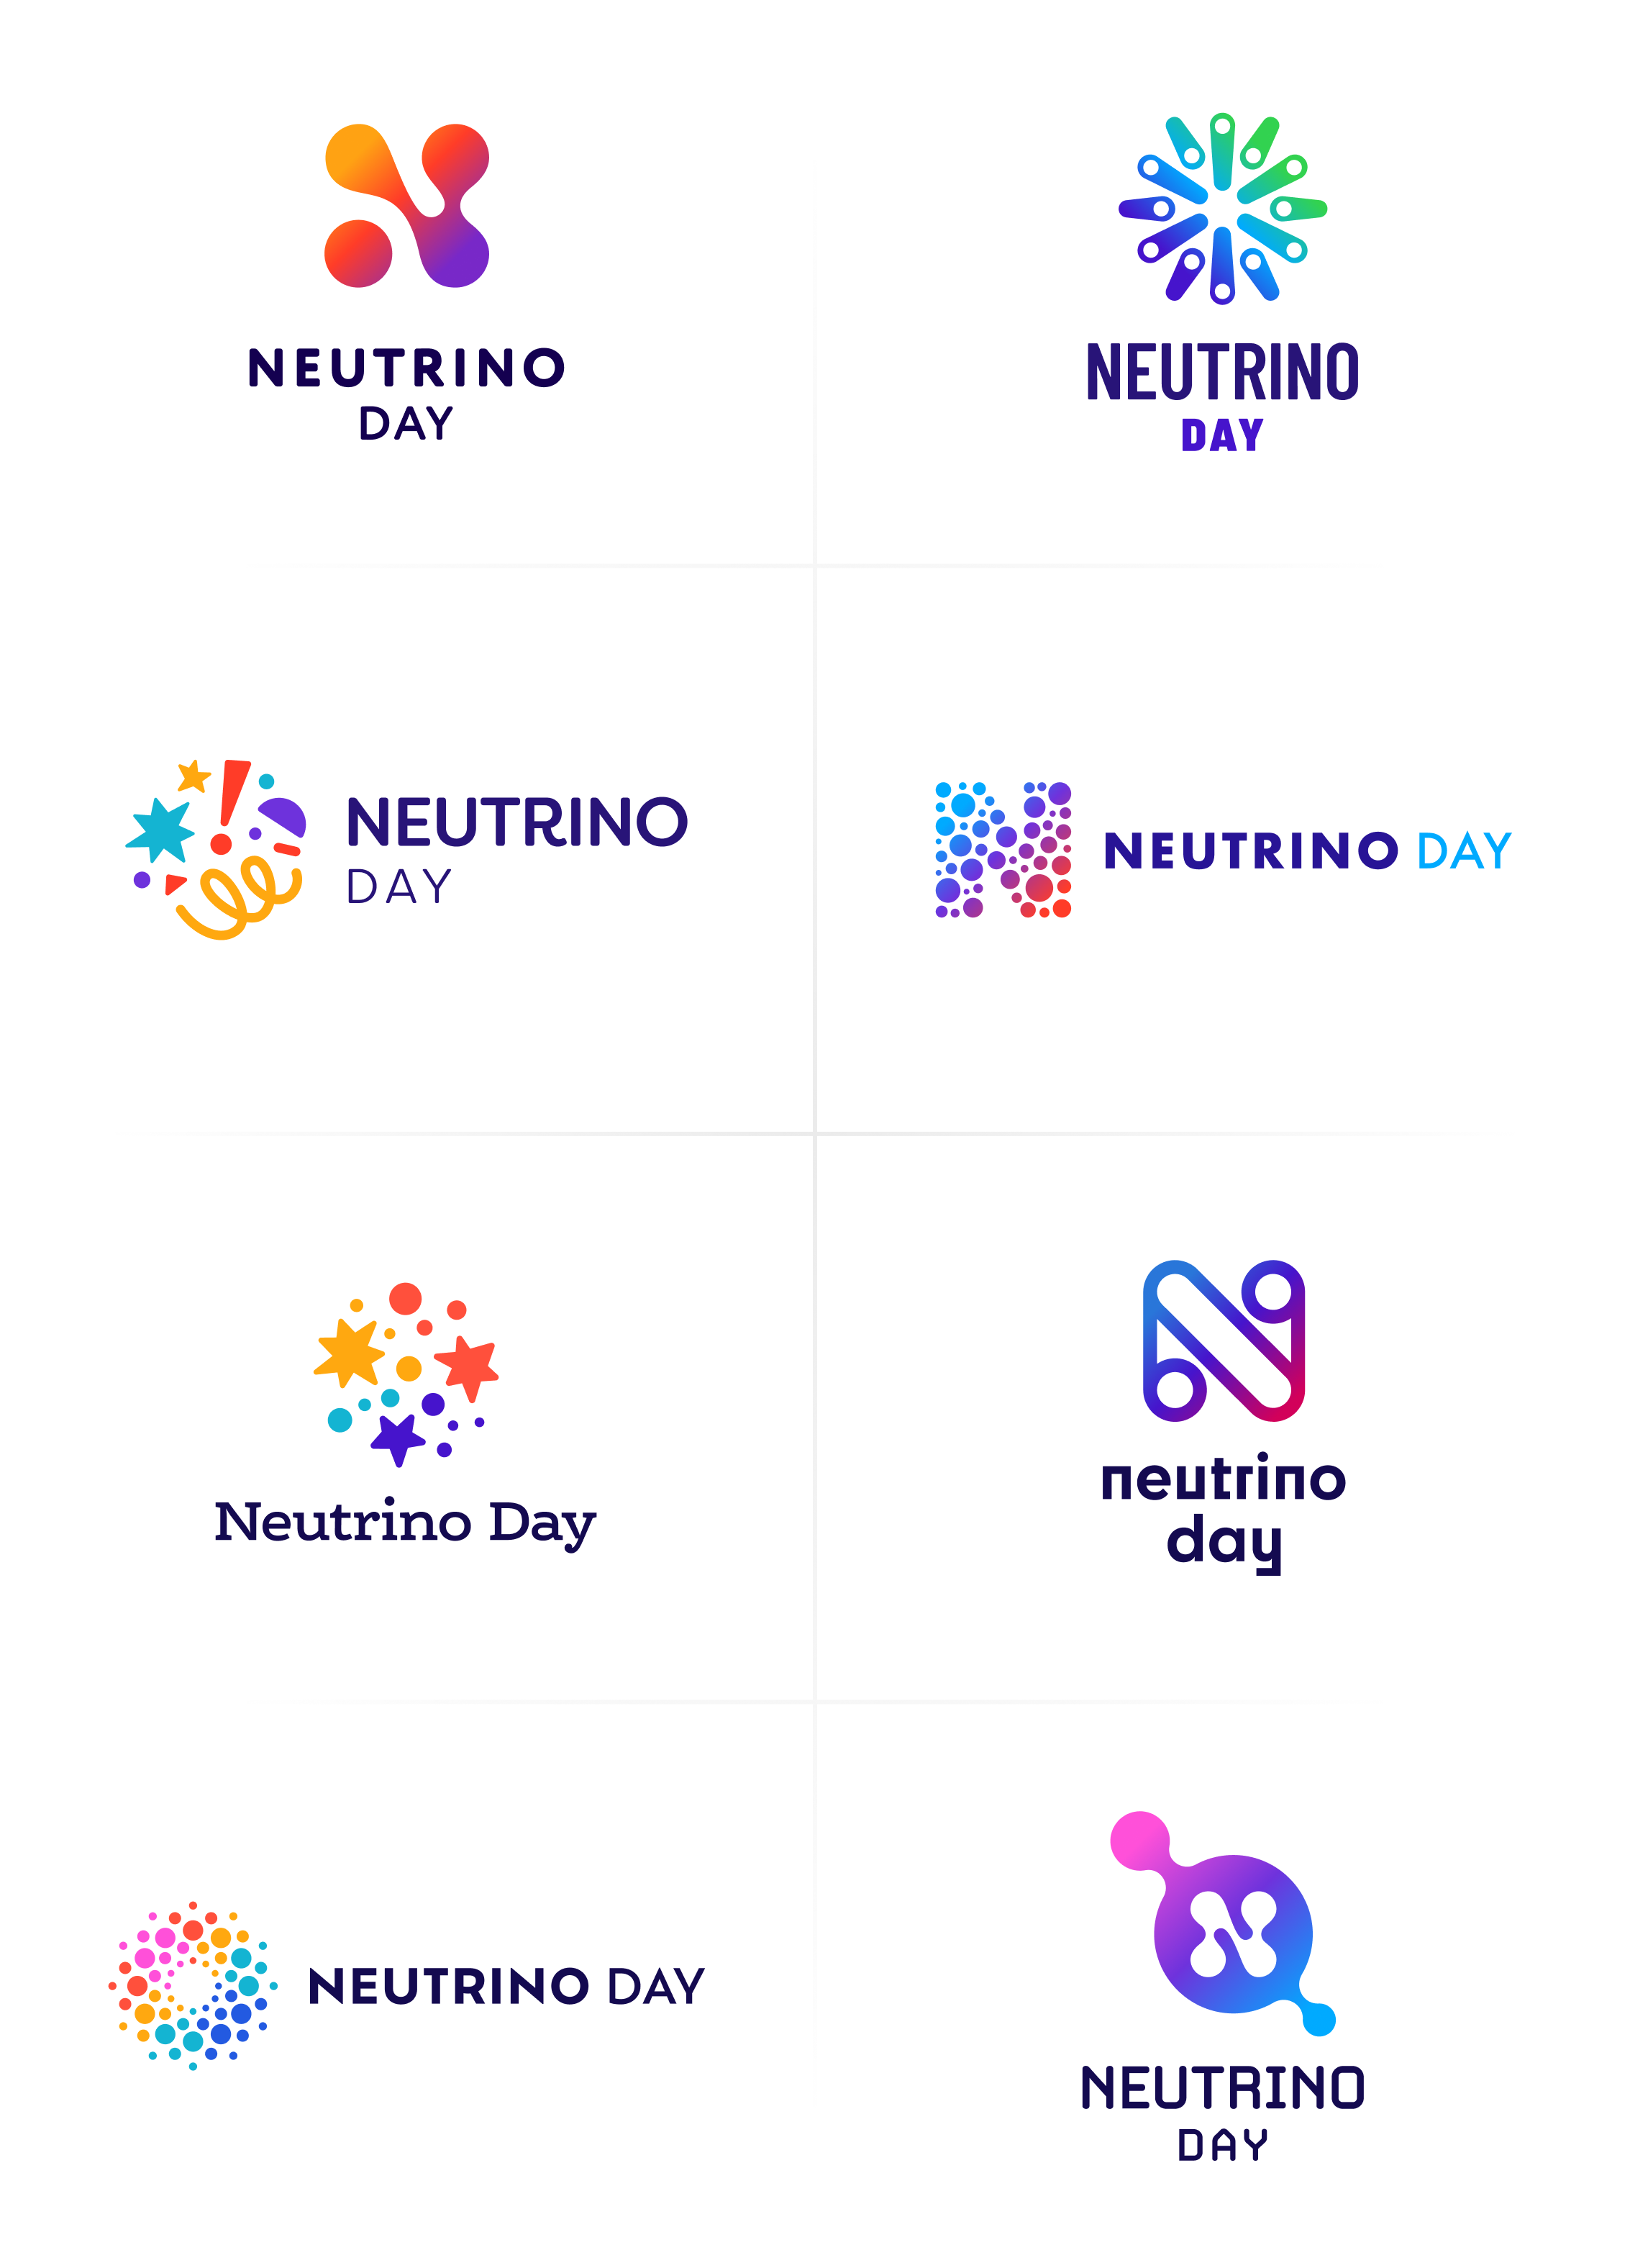 8 very different options for the Neutrino Day logo